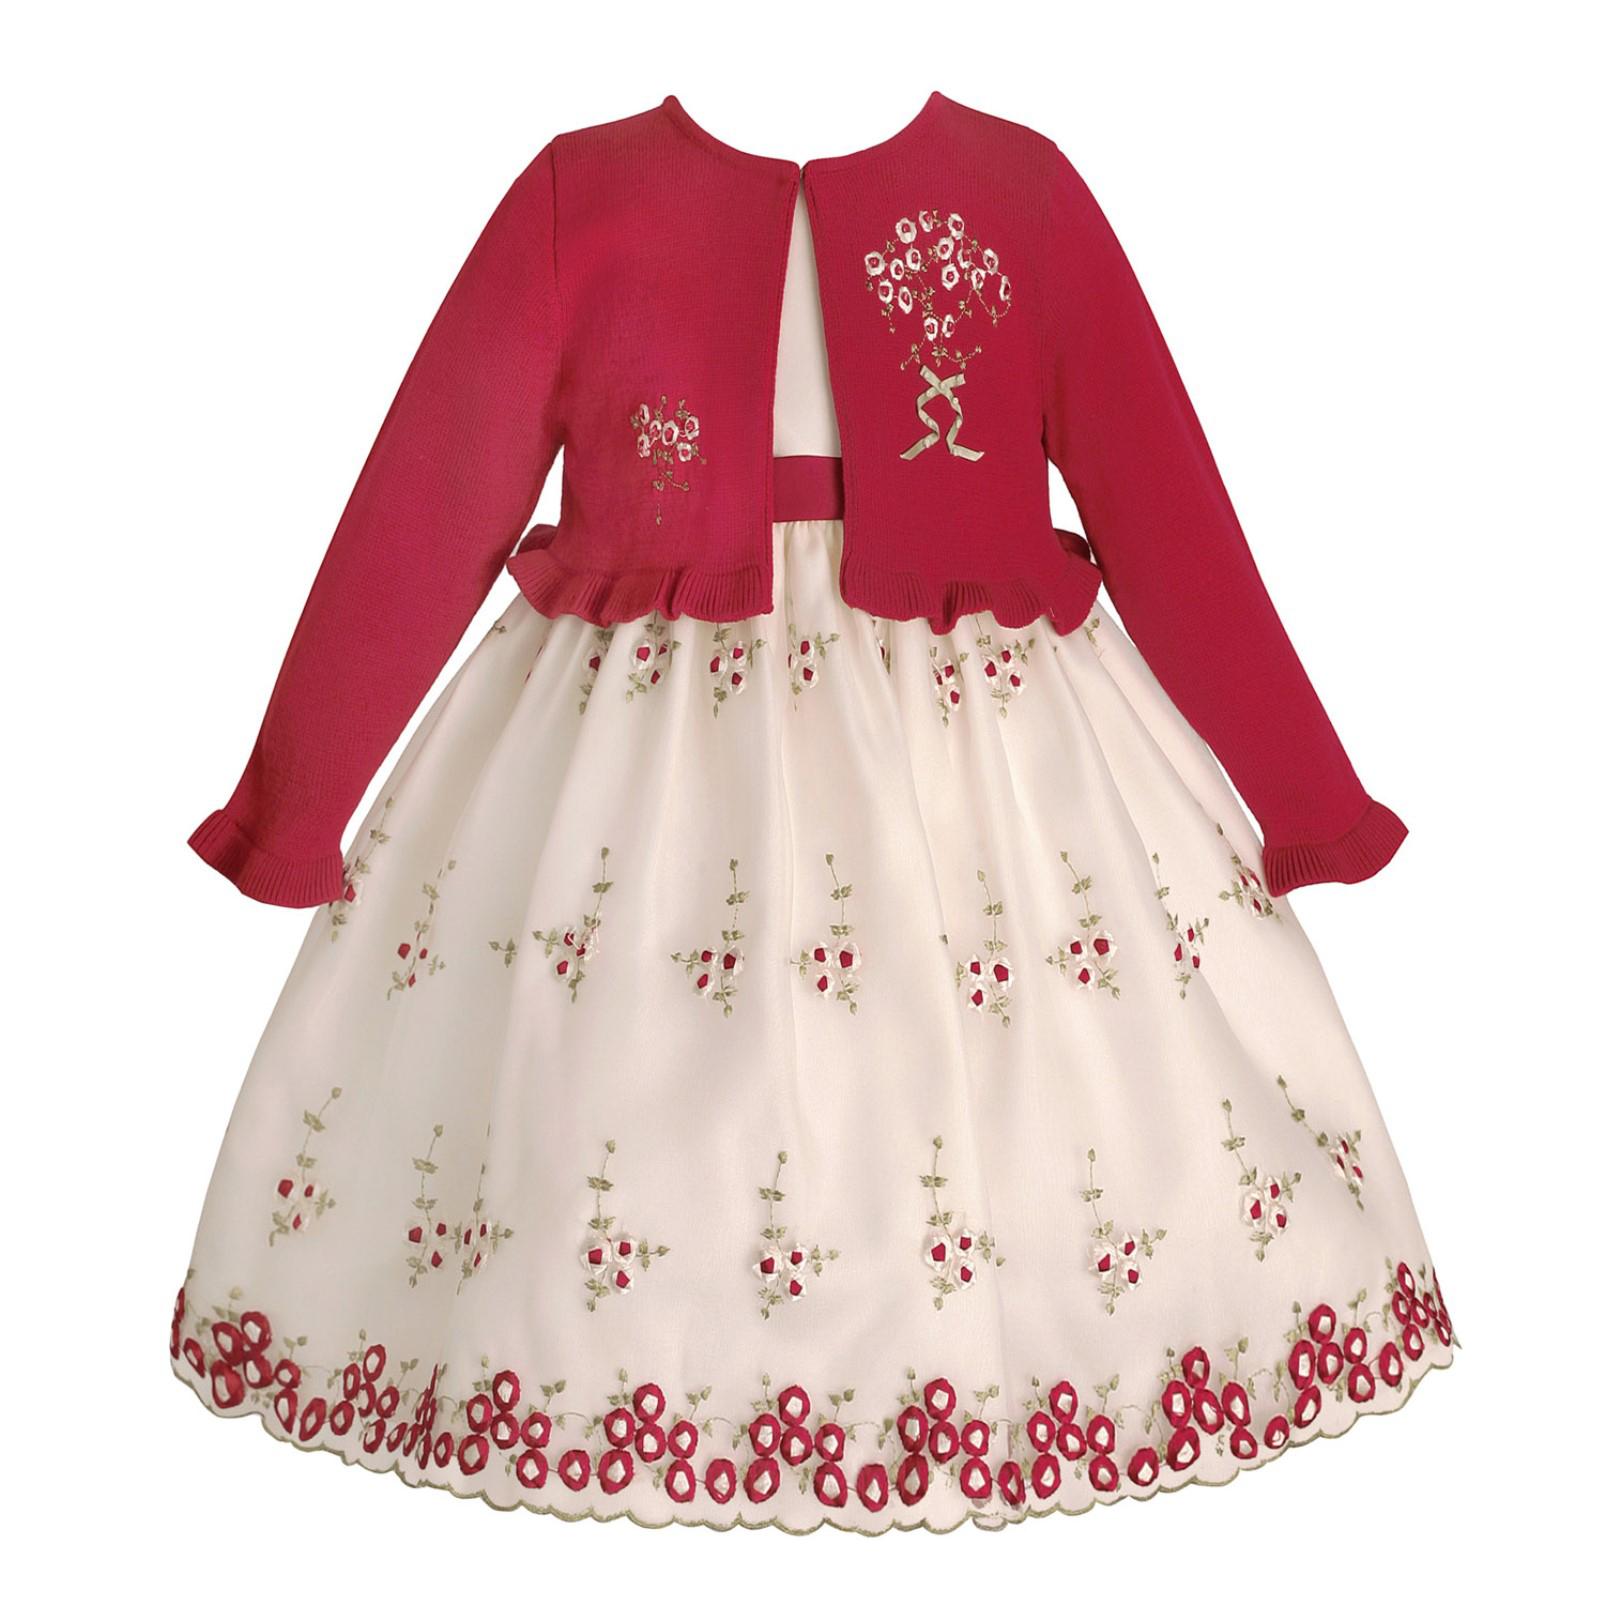 American Princess Newborn, Infant & Toddler Girls' Embroidered Occasion Dress & Cardigan